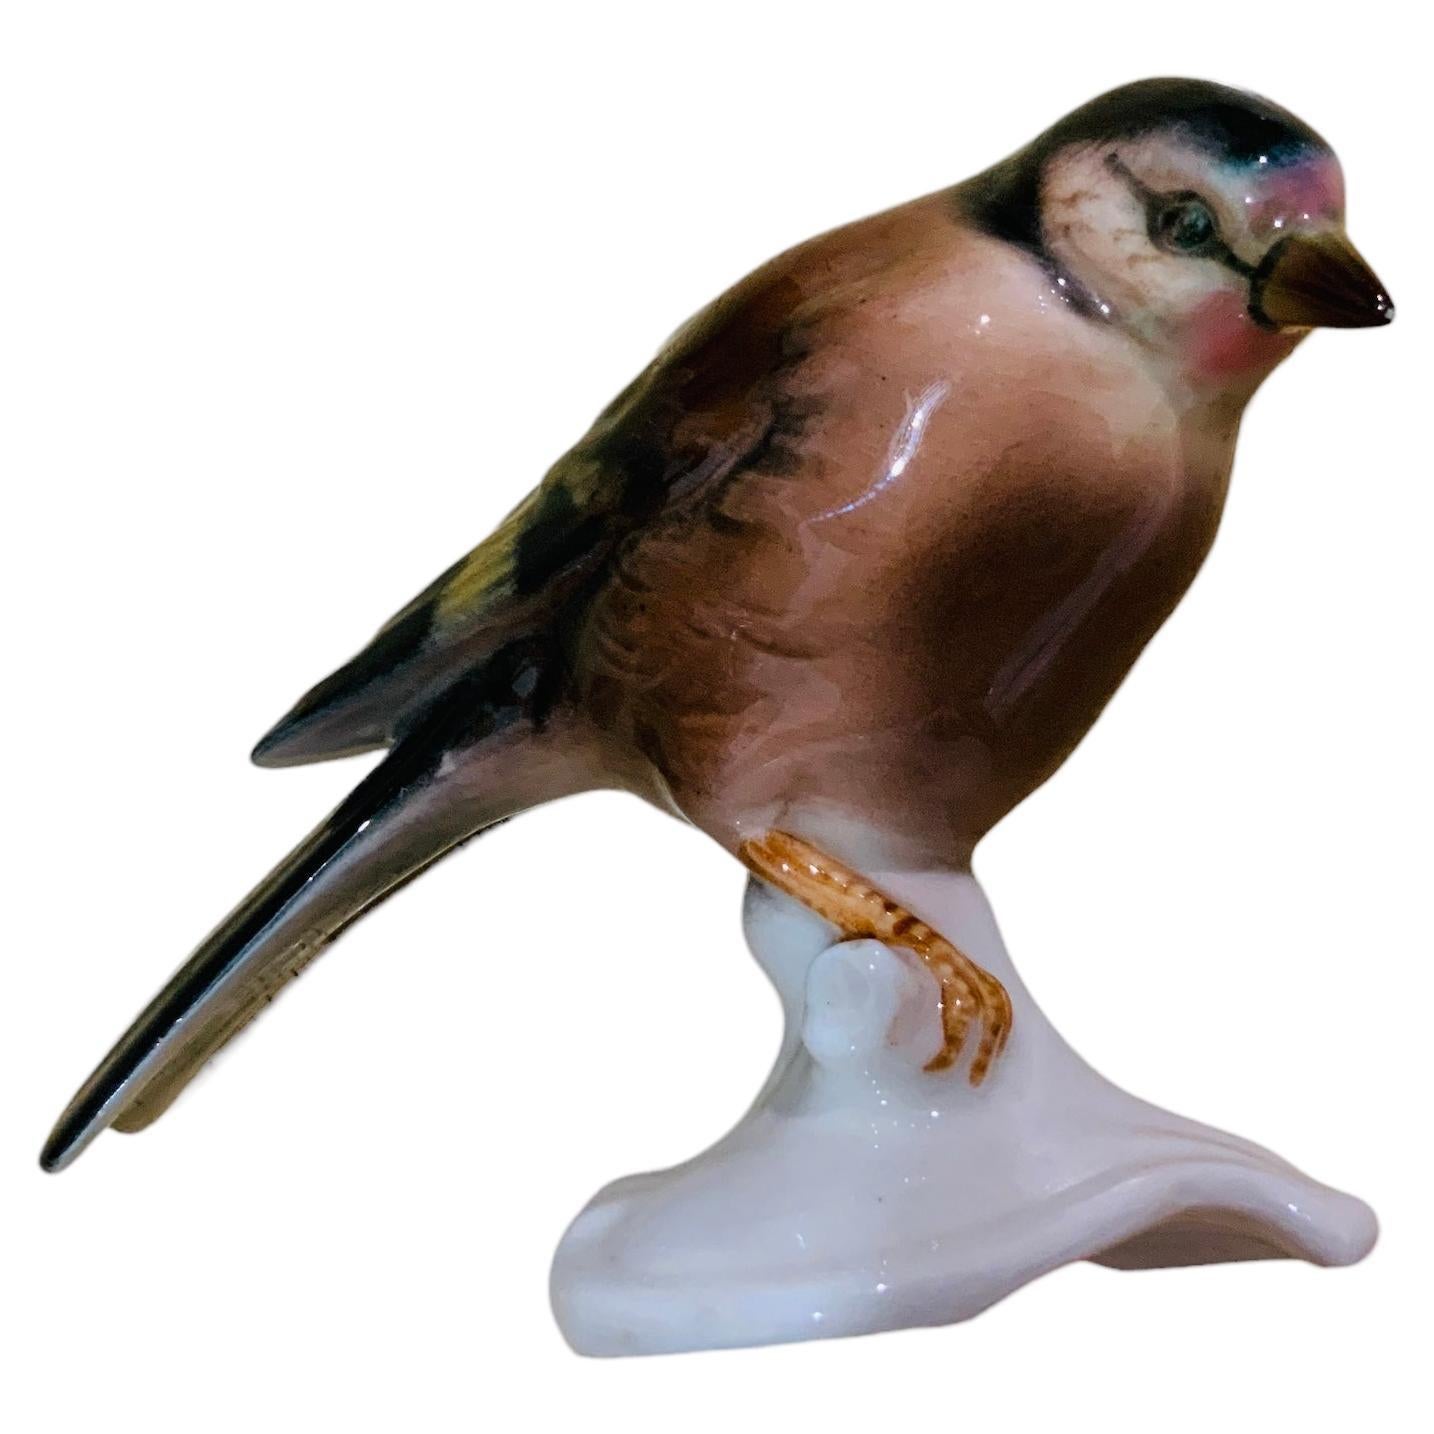 Goebel Porcelain Hand Painted Bird Figurine of a Goldfinch